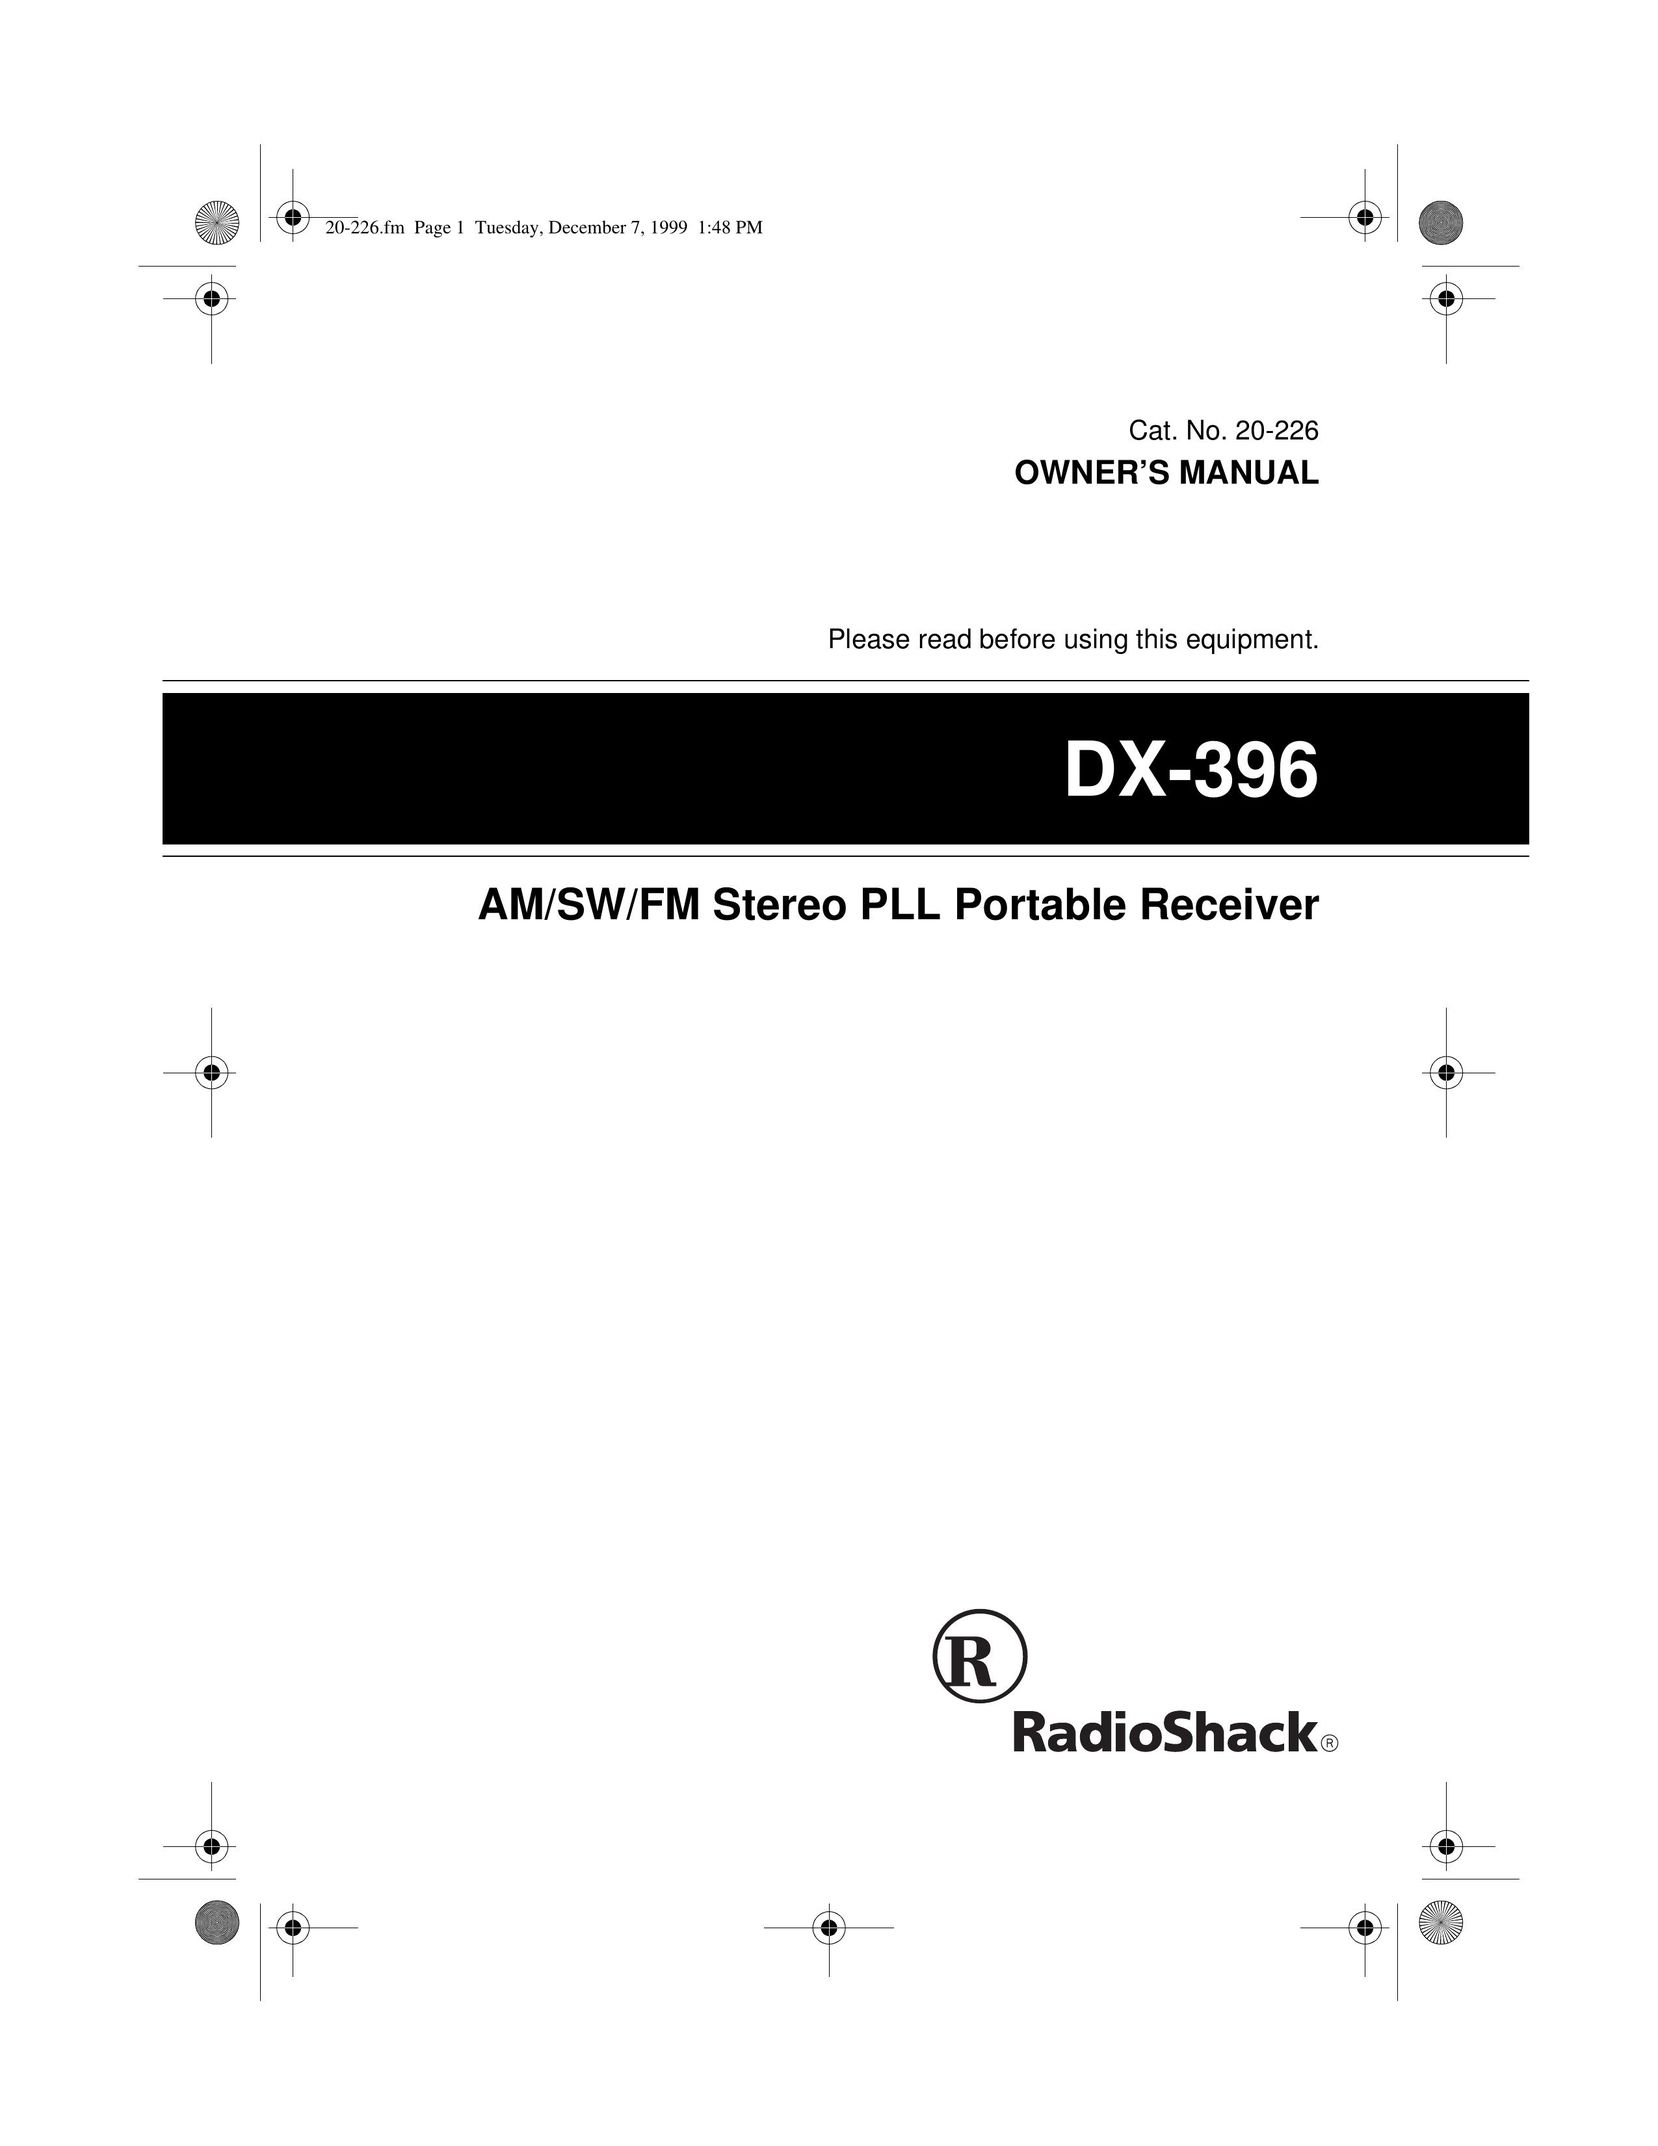 Radio Shack DX-396 Stereo Receiver User Manual